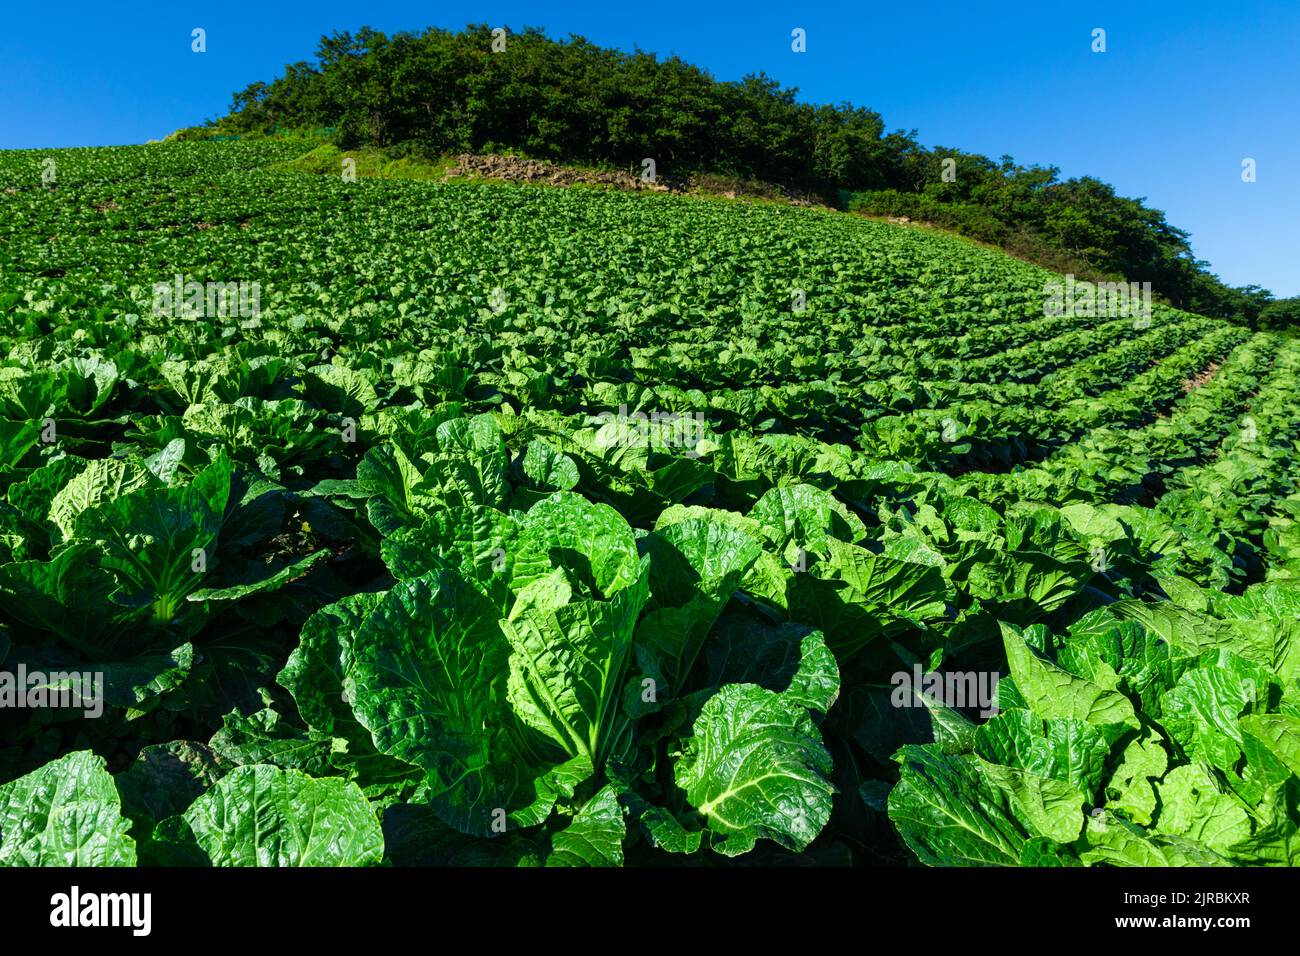 Green vegetables grown in a beautiful alpine area on a sunny morning, close-up cabbage. Taebaek-si, Gangwon-do, South Korea. Stock Photo